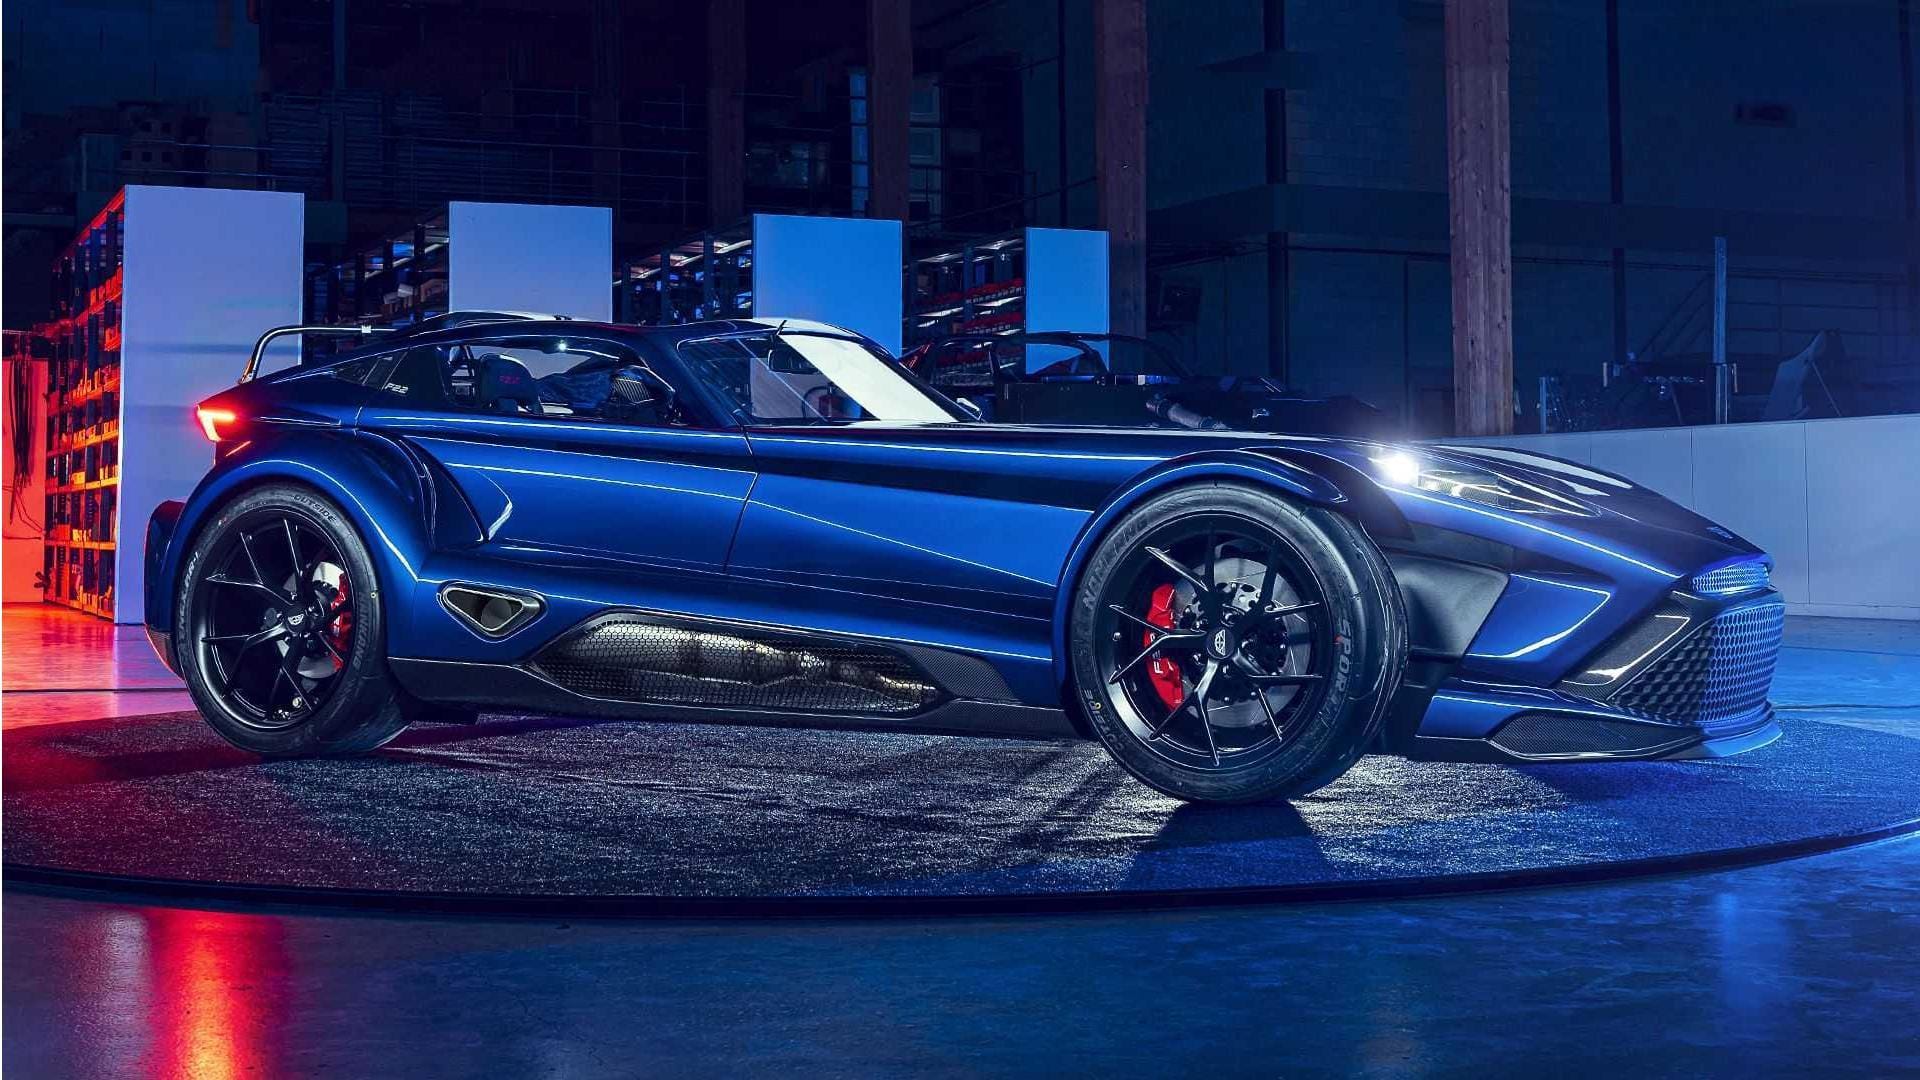 Donkervoort F22 lightweight supercar revealed; only 75 units available